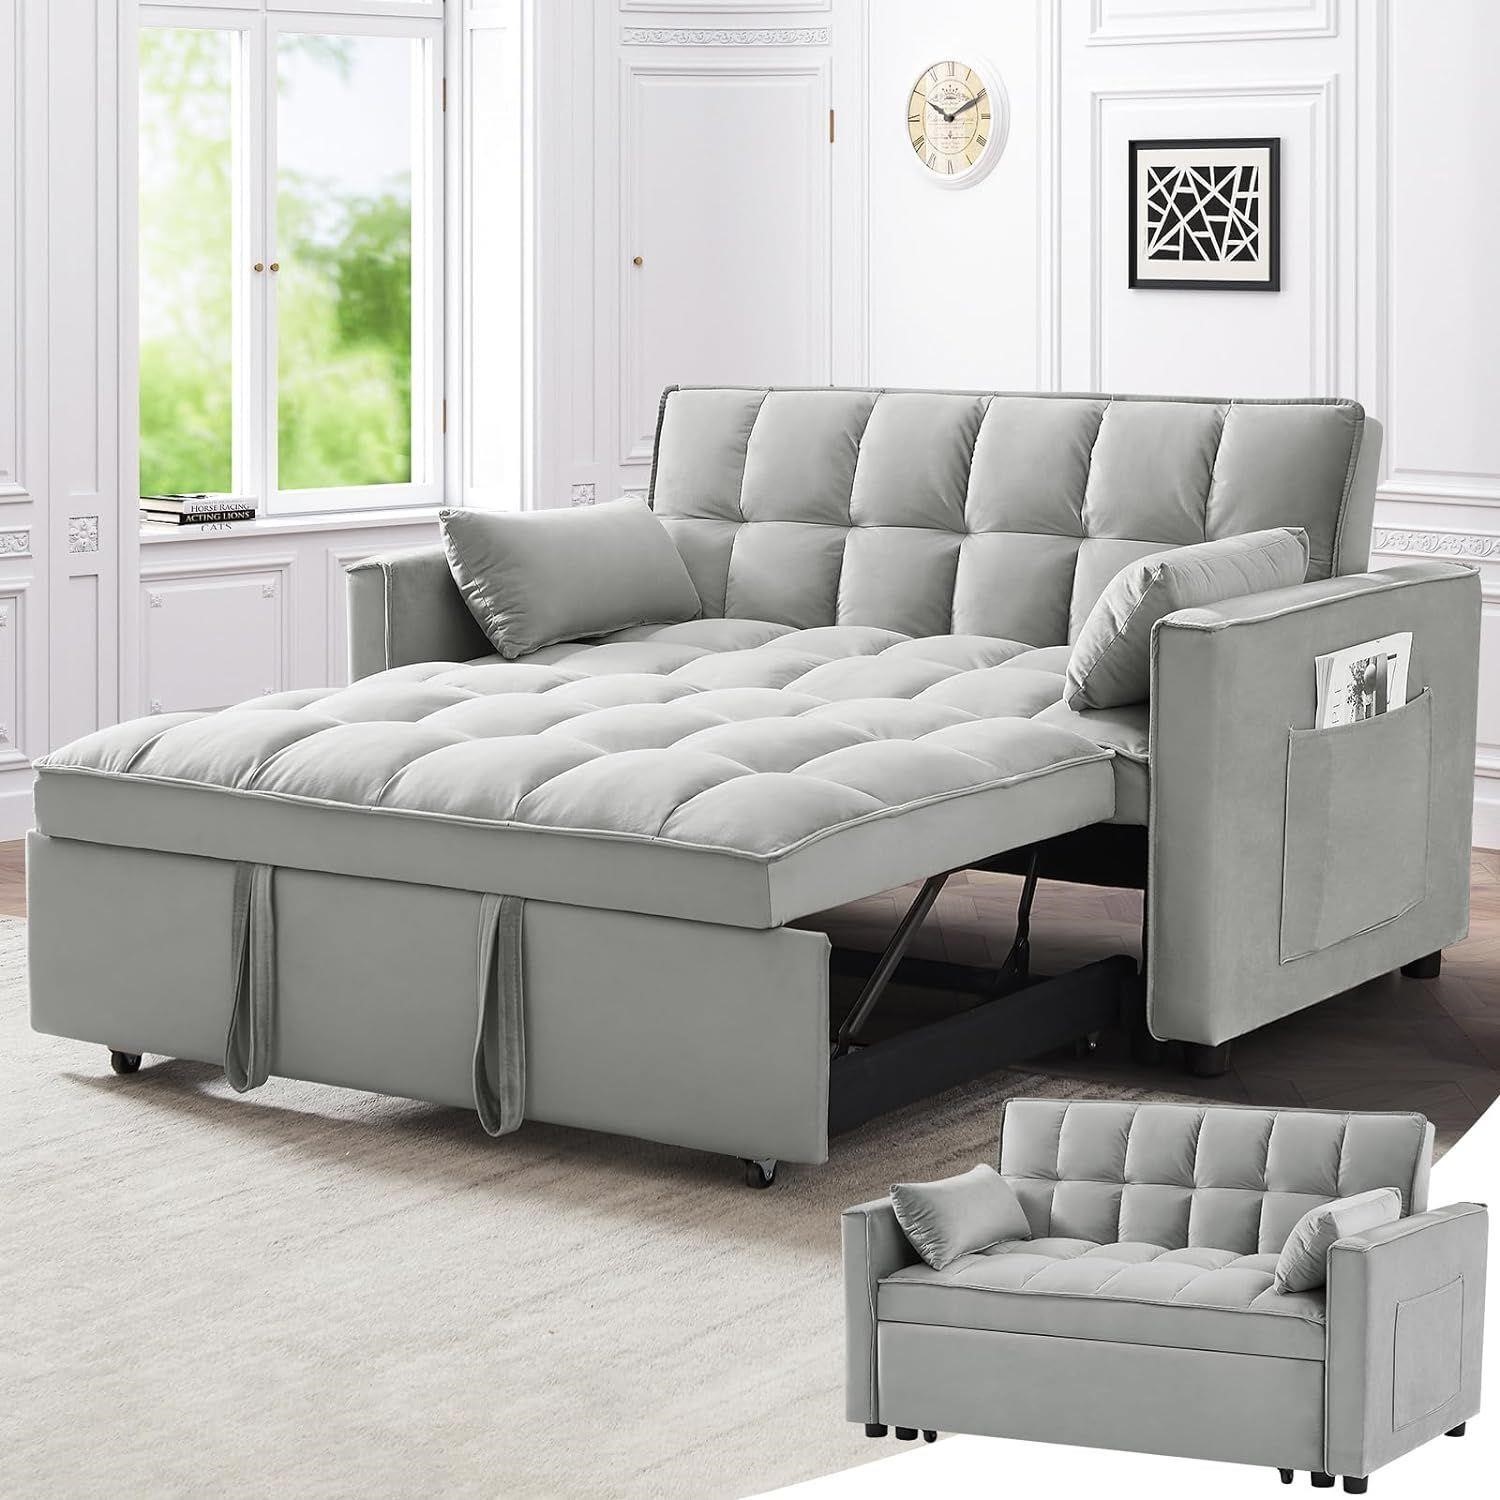 3 in 1 Convertible Sofa Bed, Gray, Full Size